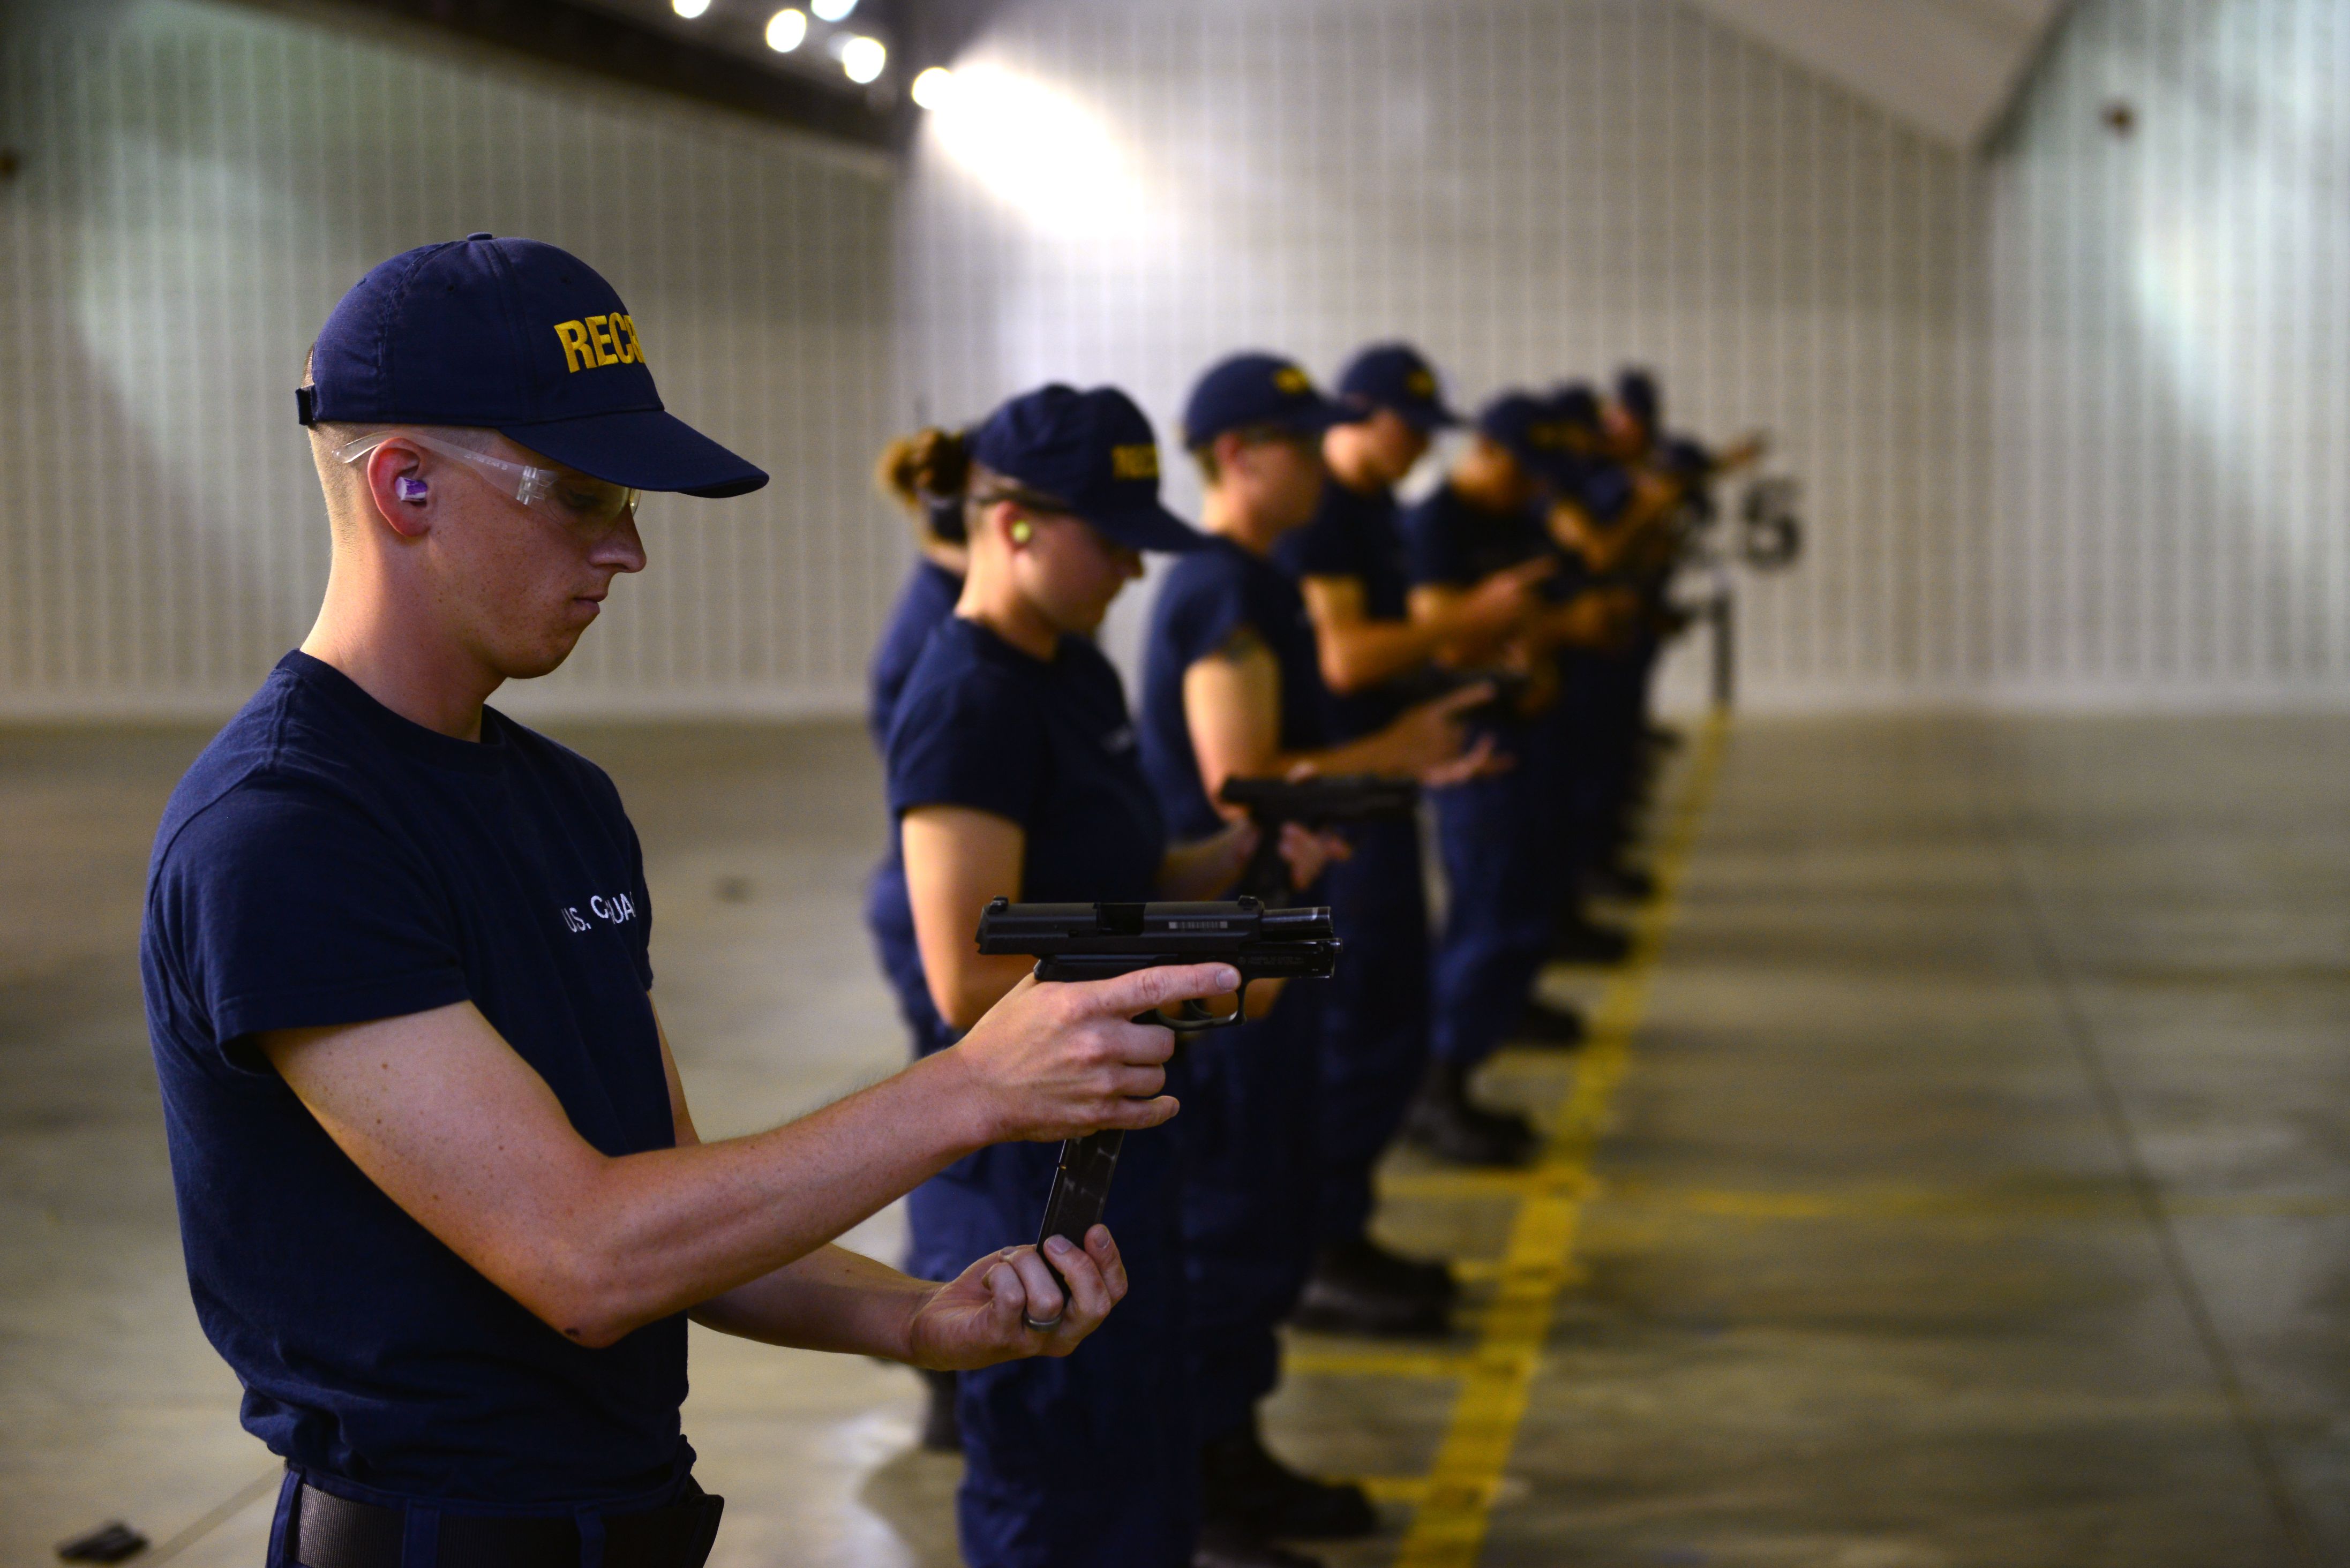 Seaman Recruit Martin Bunn slips a magazine into the Coast Guard's standard issue Sig Sauer P229 .40-caliber during a live-fire exercise at the FAA Technical Center in Galloway, N.J., July 1, 2015. Bunn and the rest of recruit company Lima 191 were transported via bus from the Coast Guard Training Center to the FAA facility to utilize their indoor range. (U.S. Coast Guard photo by Chief Warrant Officer John Edwards)